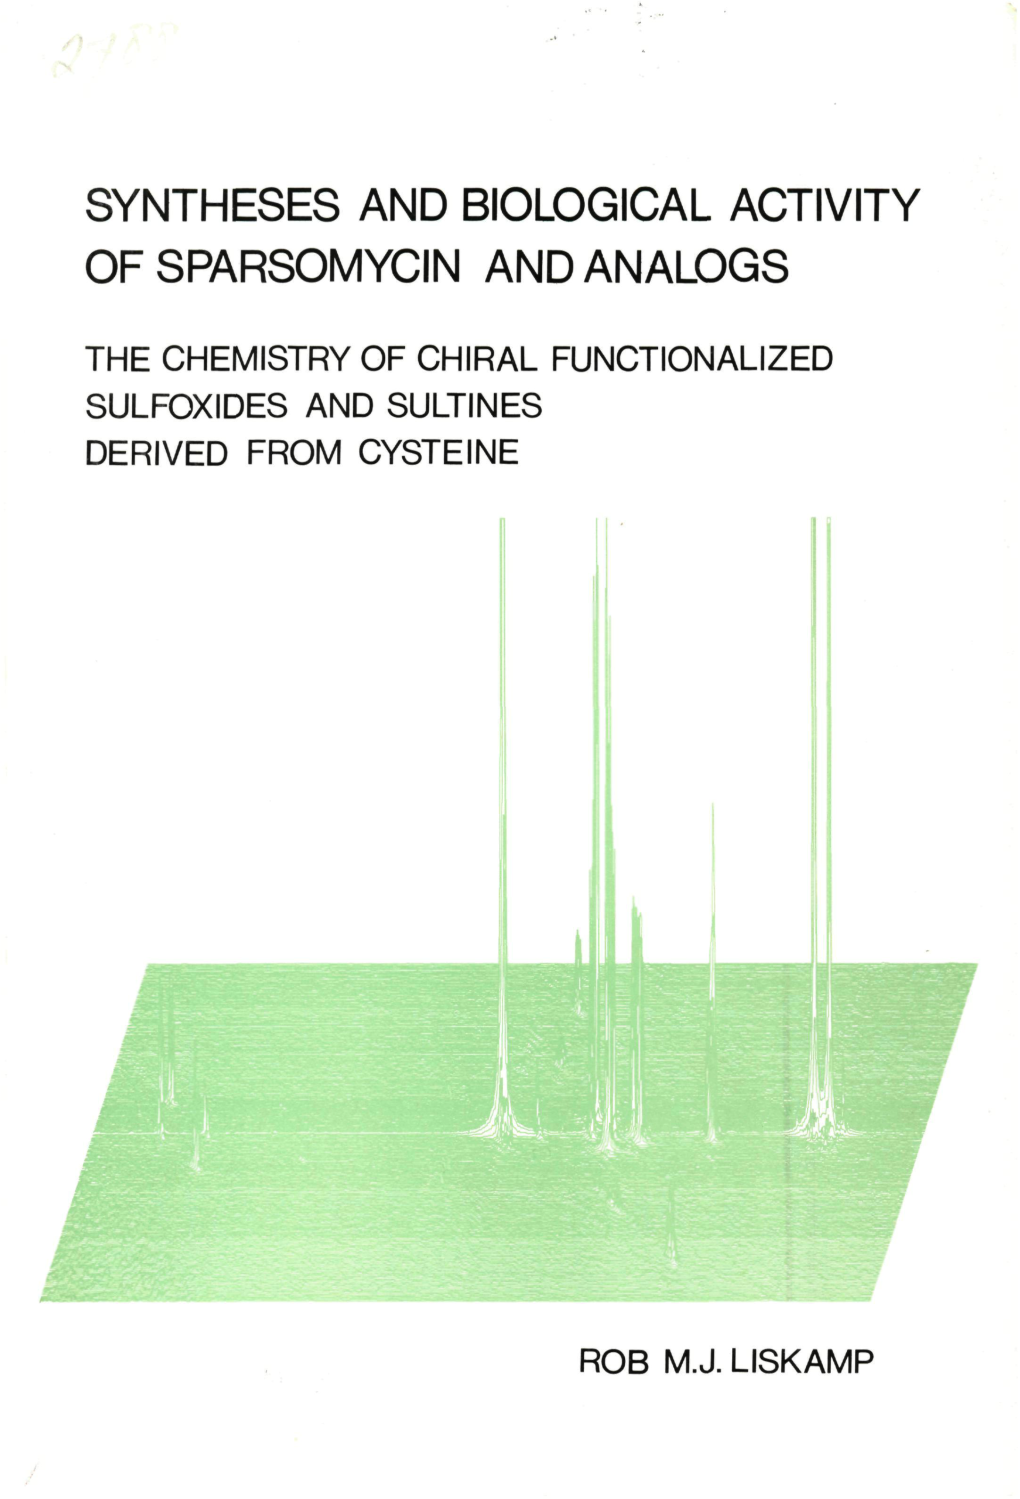 Syntheses and Biological Activity of Sparsomycin and Analogs